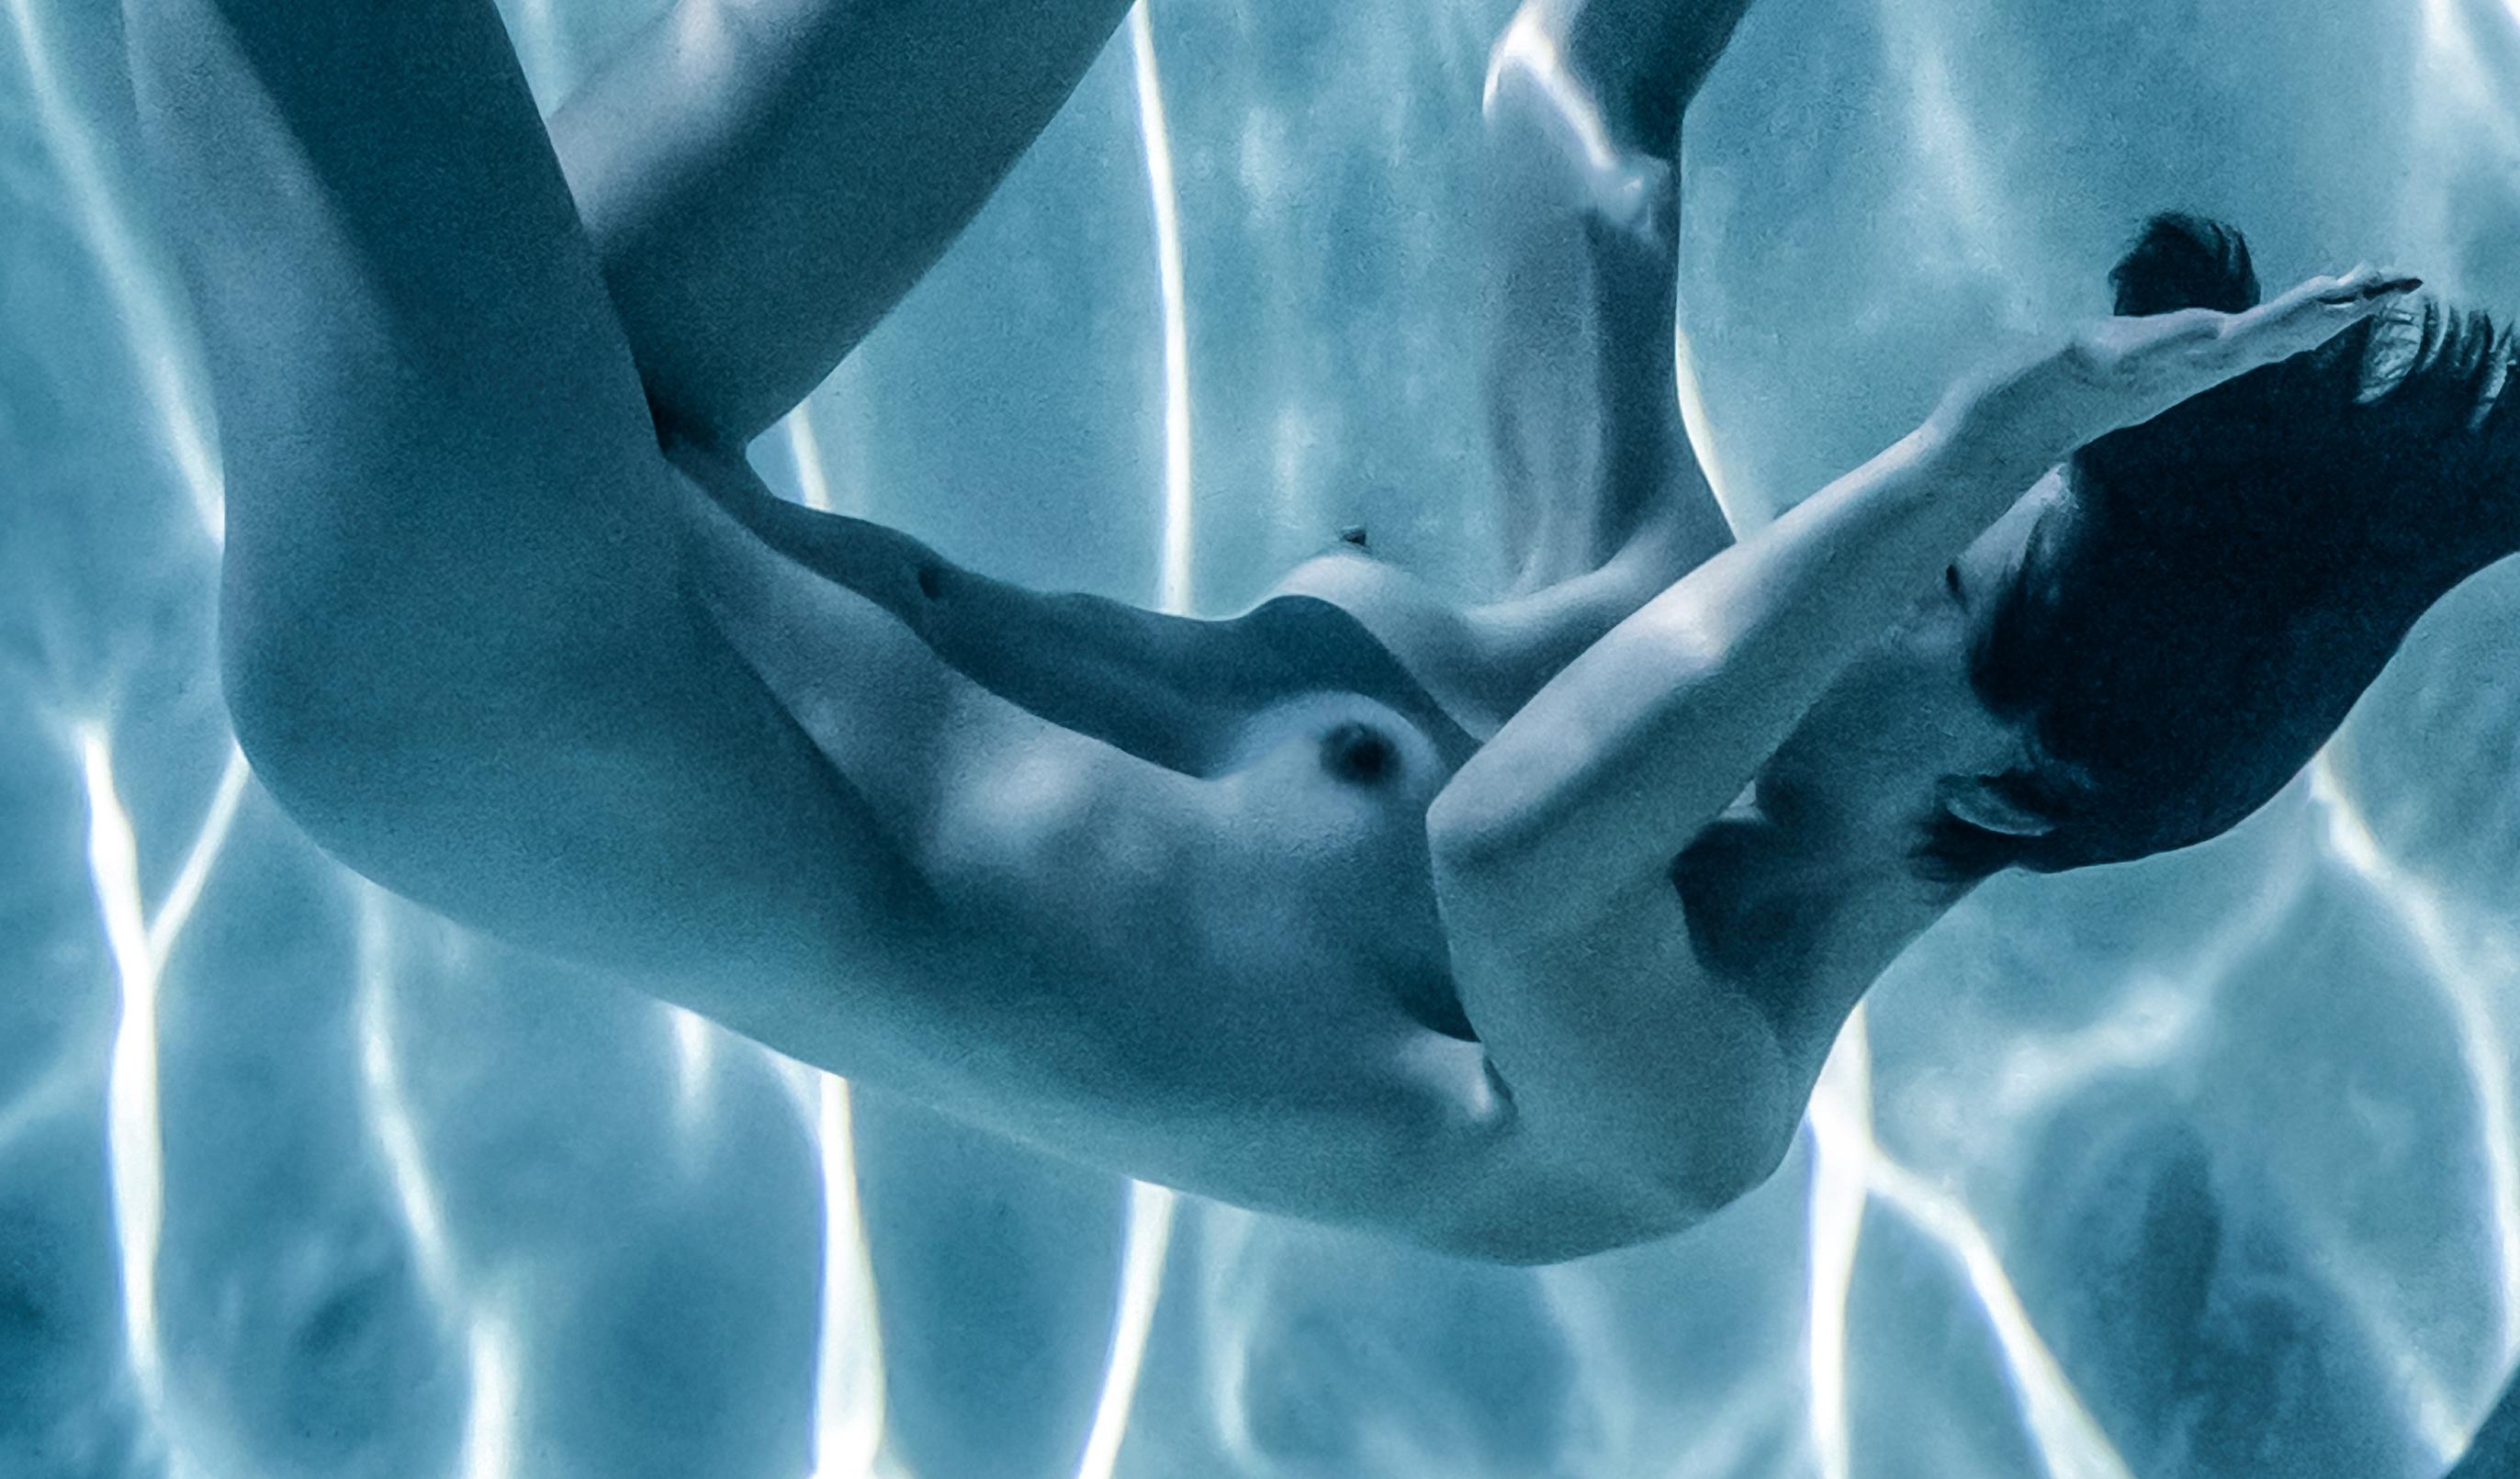 Slow Motion (blue) - underwater nude photograph - archival pigment print - Blue Black and White Photograph by Alex Sher